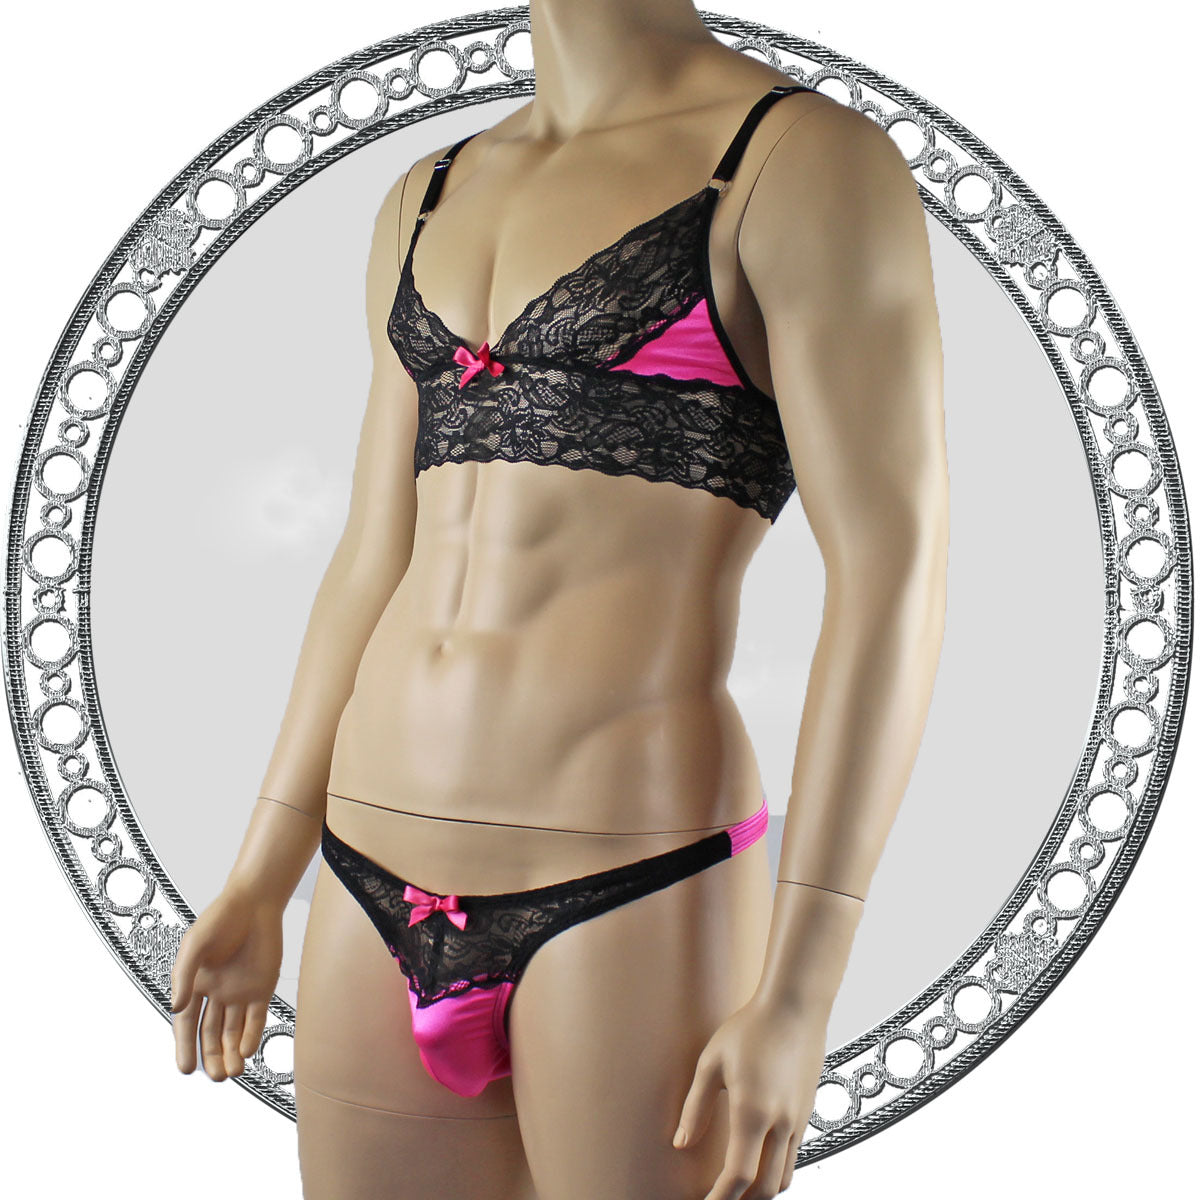 Mens Joanne Lace Bra Top Lingerie and Thong for Men Hot Pink and Black Lace